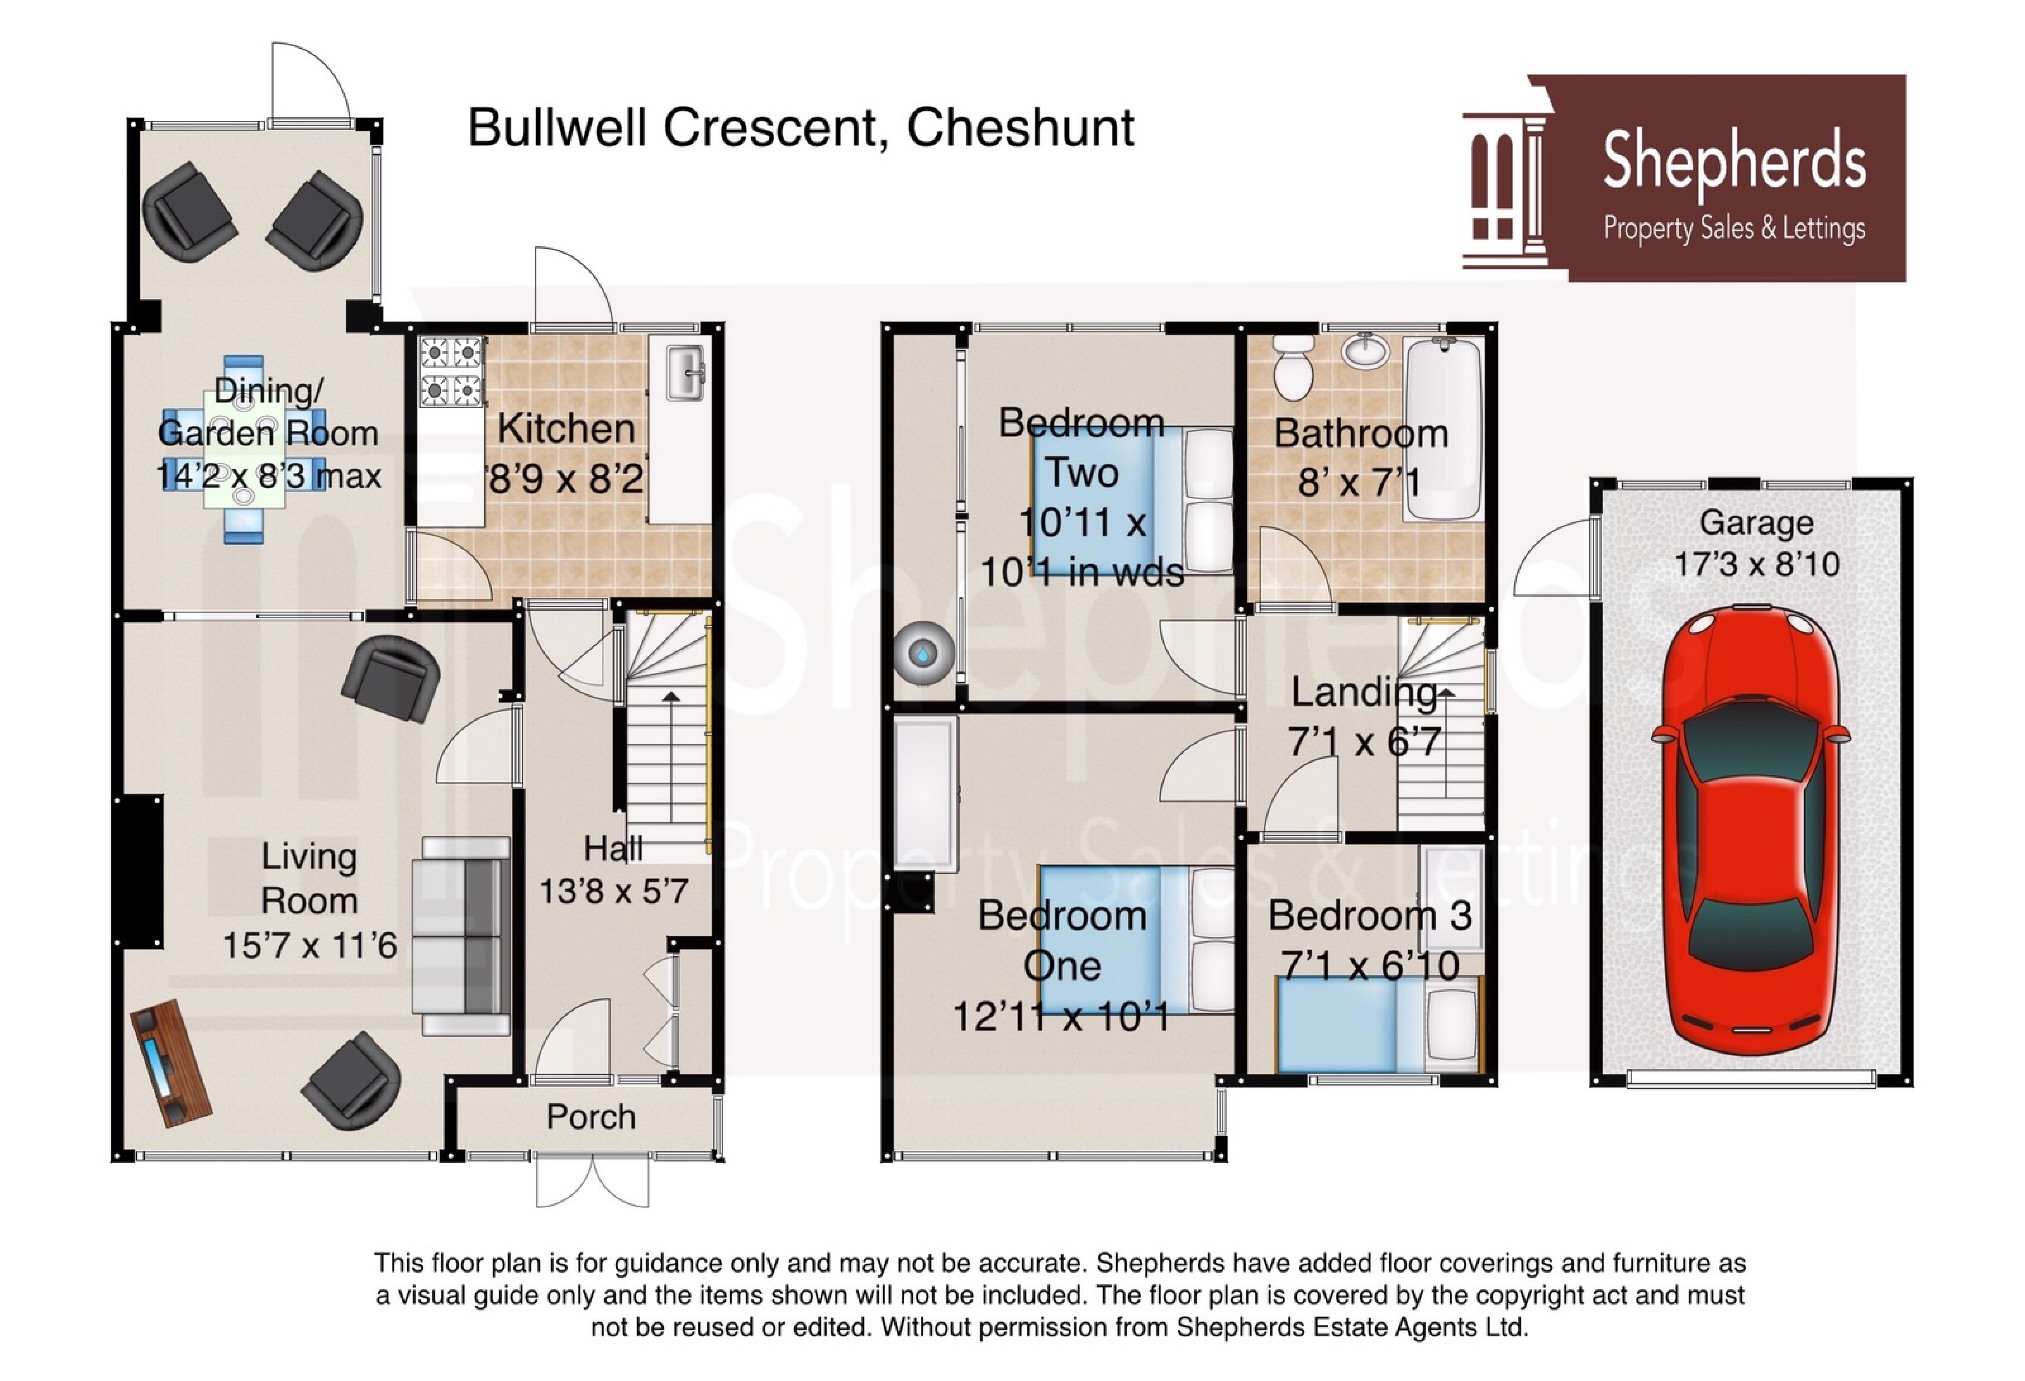 3 Bedrooms Semi-detached house for sale in Bullwell Crescent, Cheshunt, Hertfordshire EN8